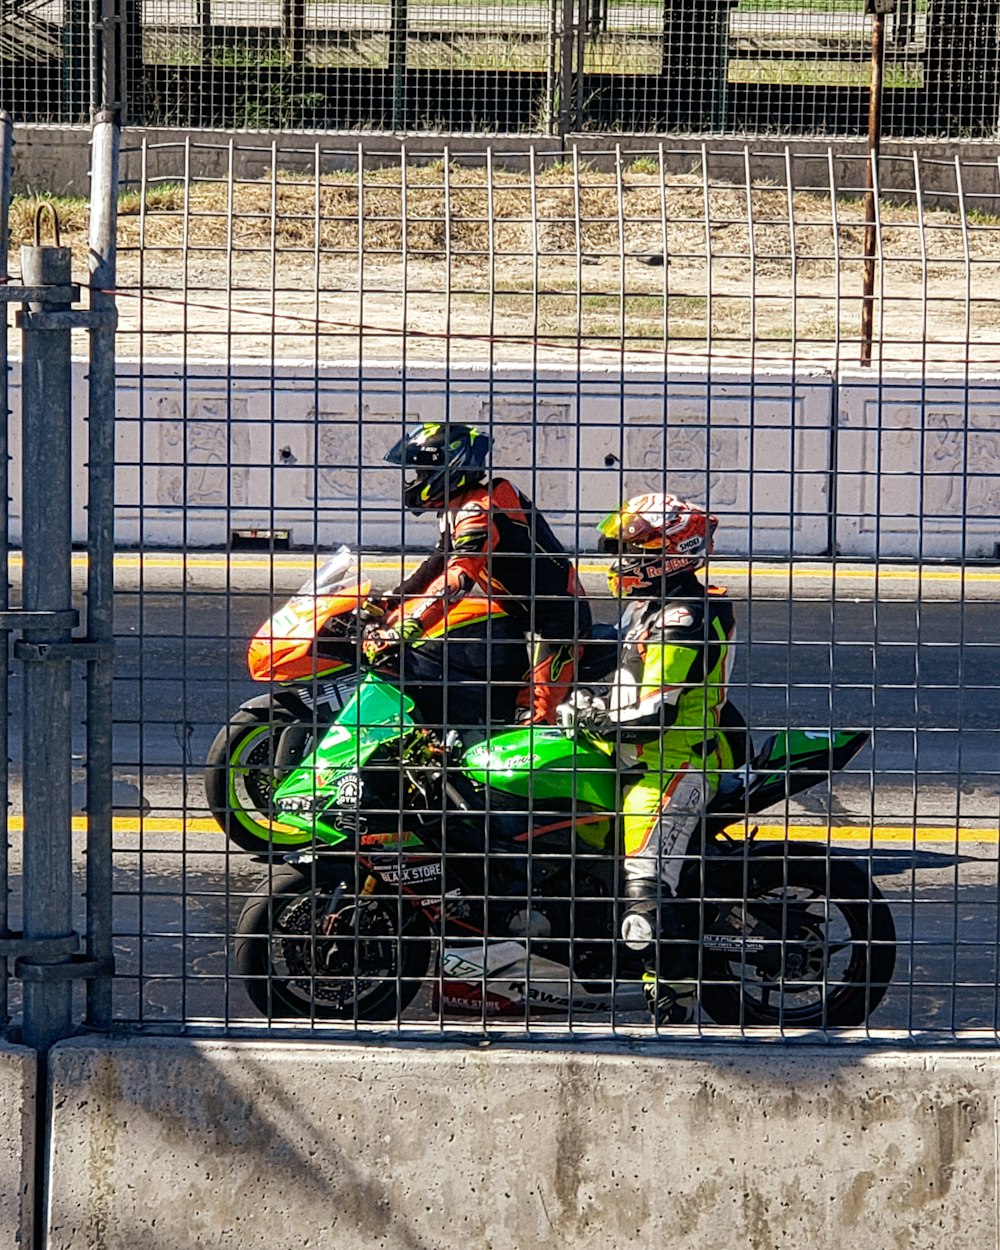 two people on a motorcycle behind a fence